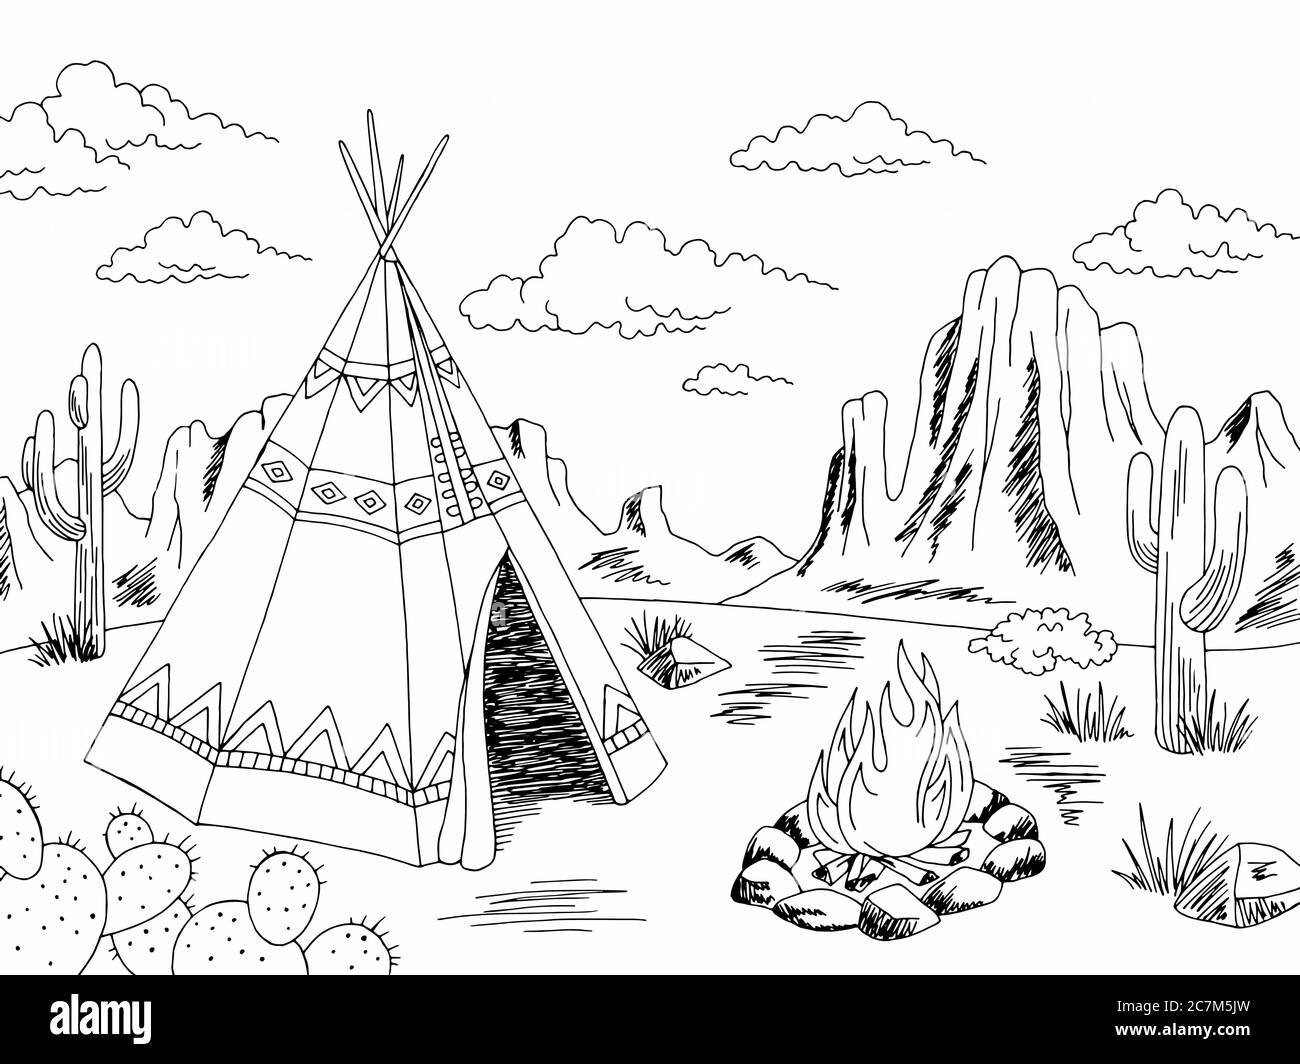 Wigwam American indian house exterior graphic black white landscape sketch illustration vector Stock Vector